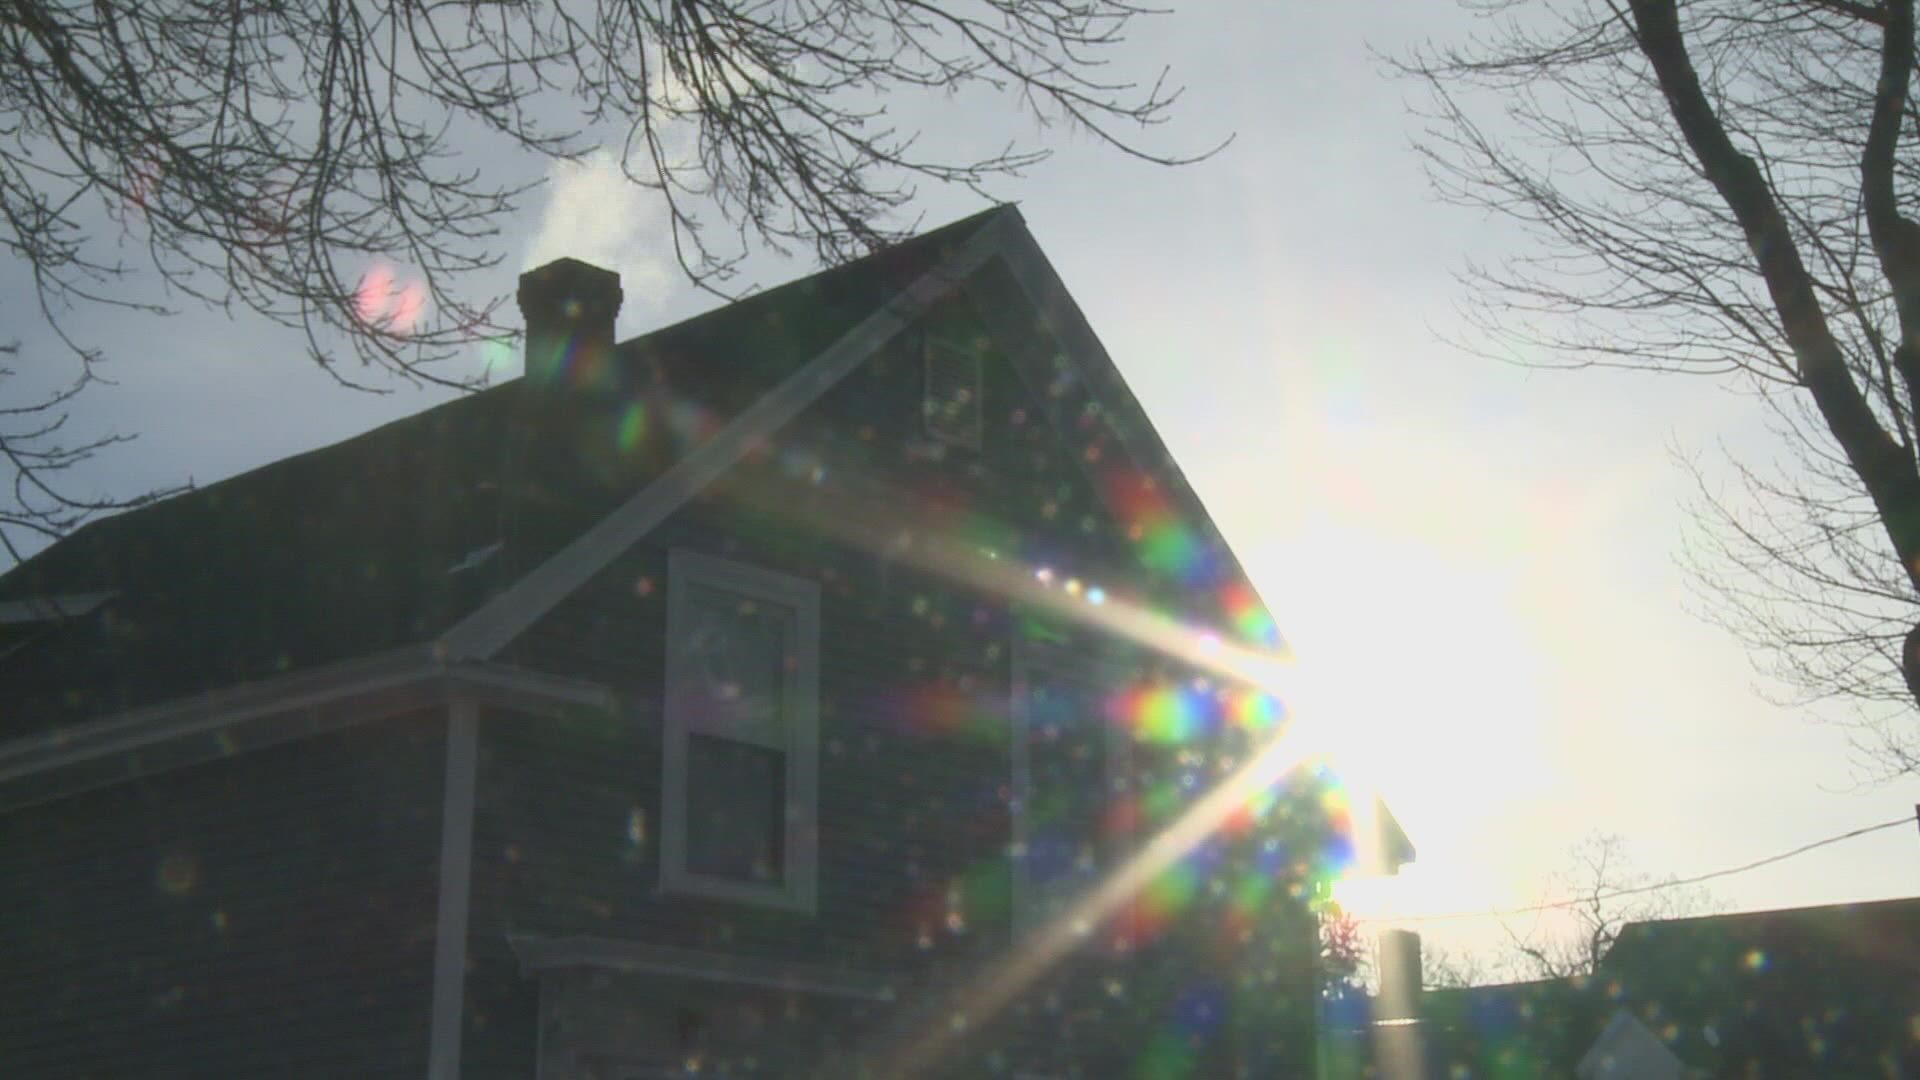 We've had several members from our NEWS CENTER Maine team speak with local officials to learn more about the need for heating assistance around the state.